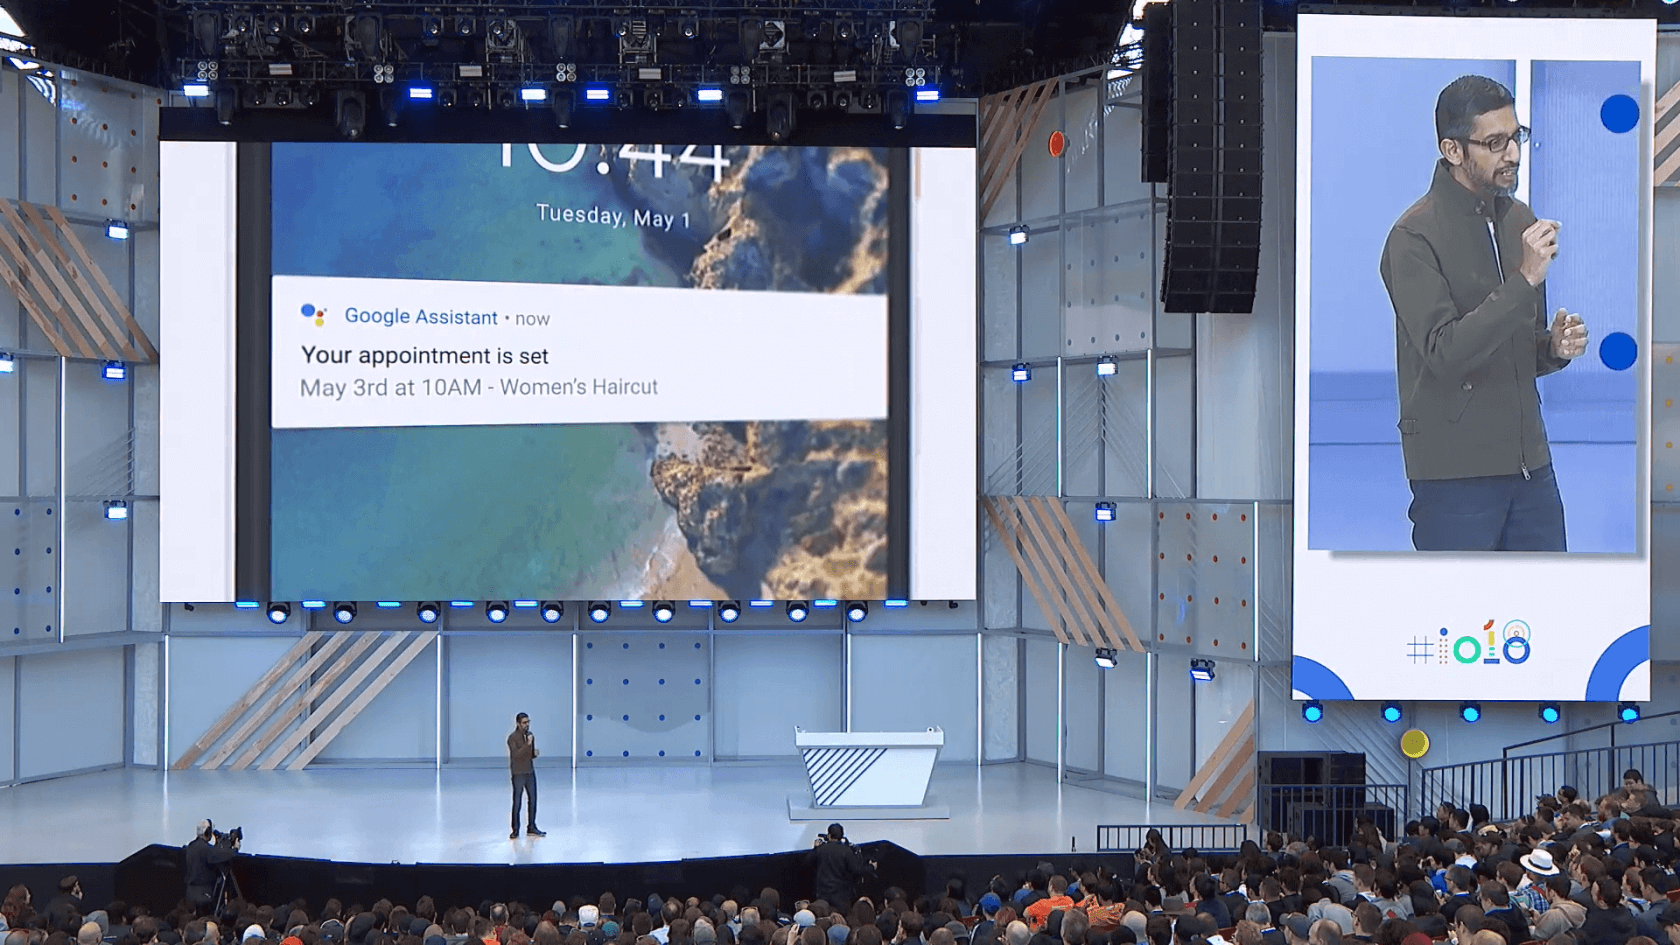 Confirmed: Google's Duplex technology definitely was not faked